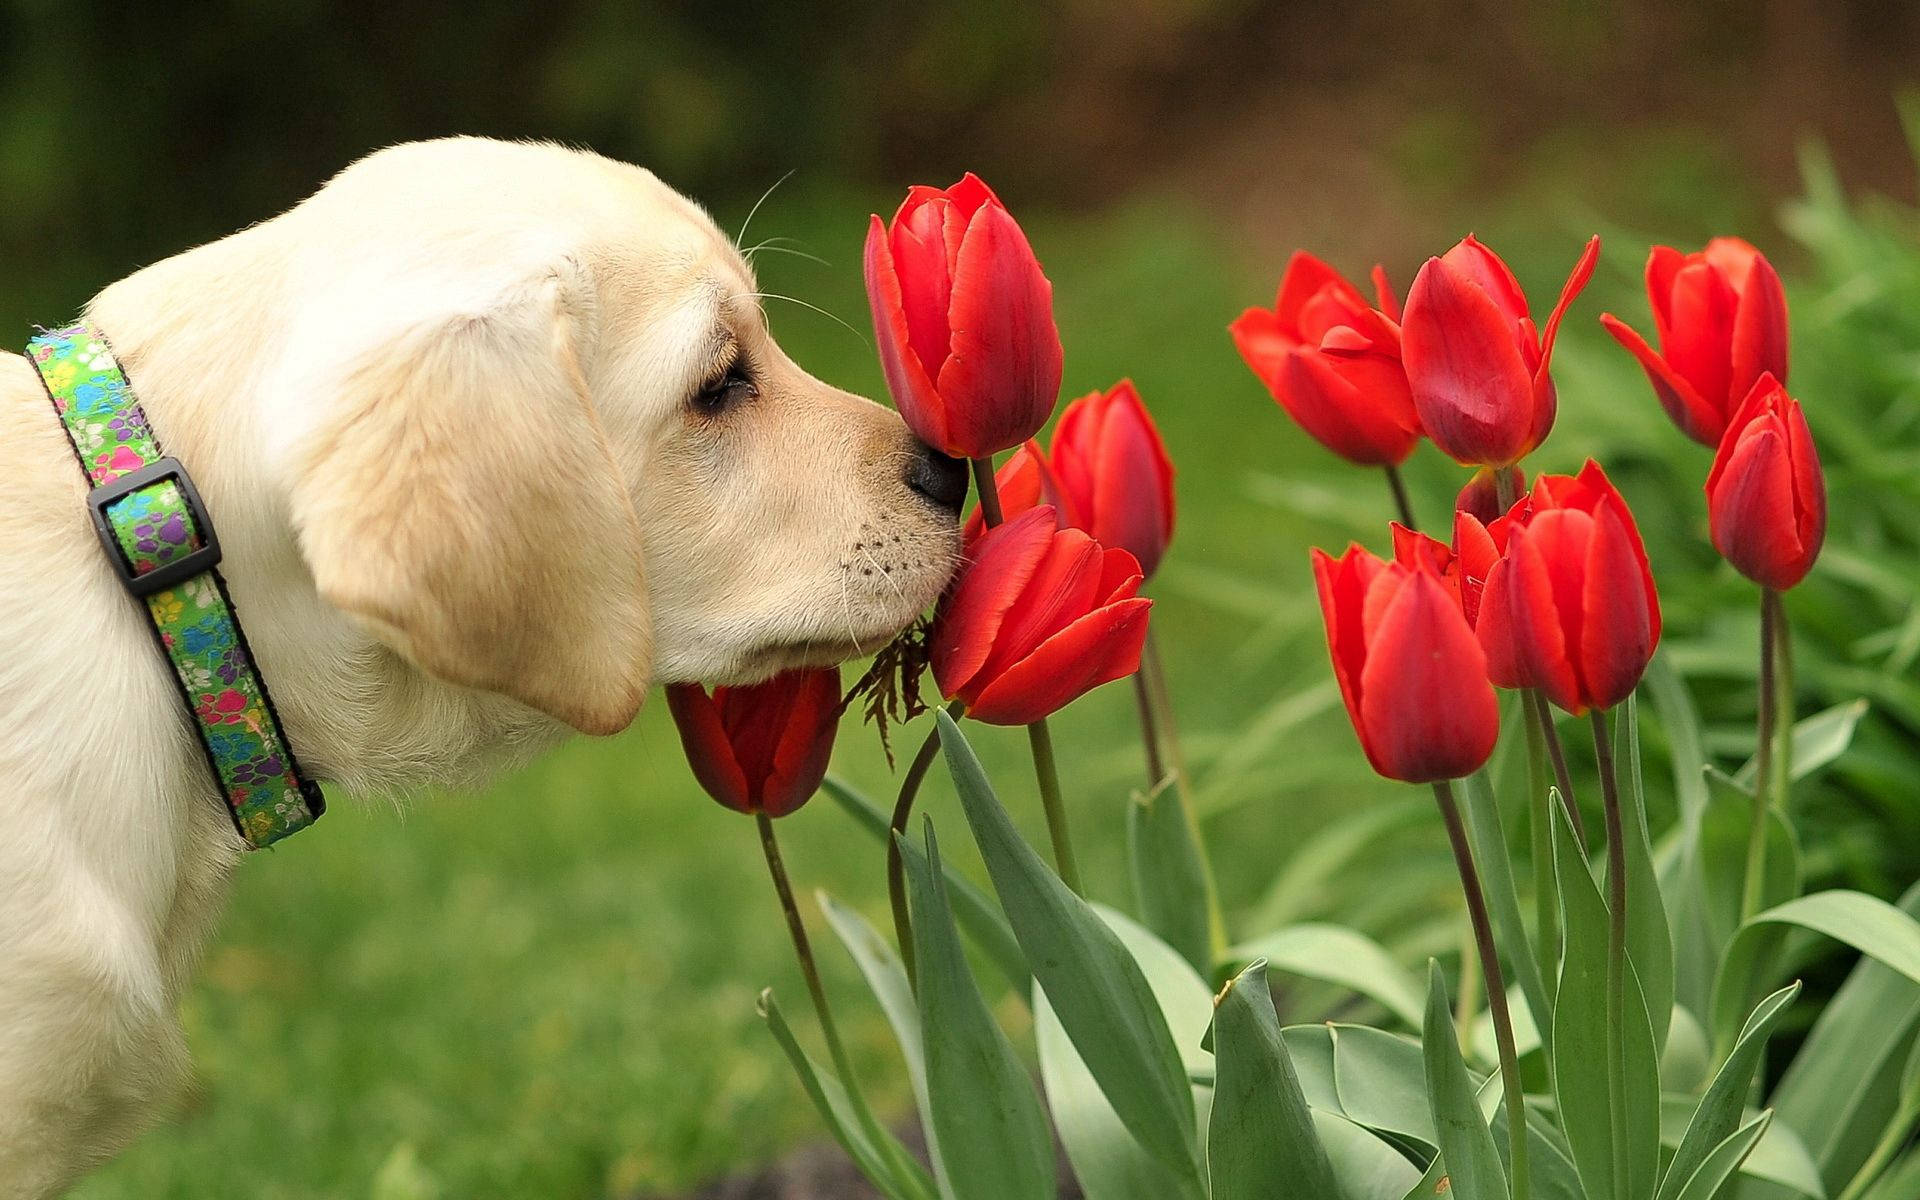 Dog wallpaper of cute Lab puppy smelling red tulips in the garden